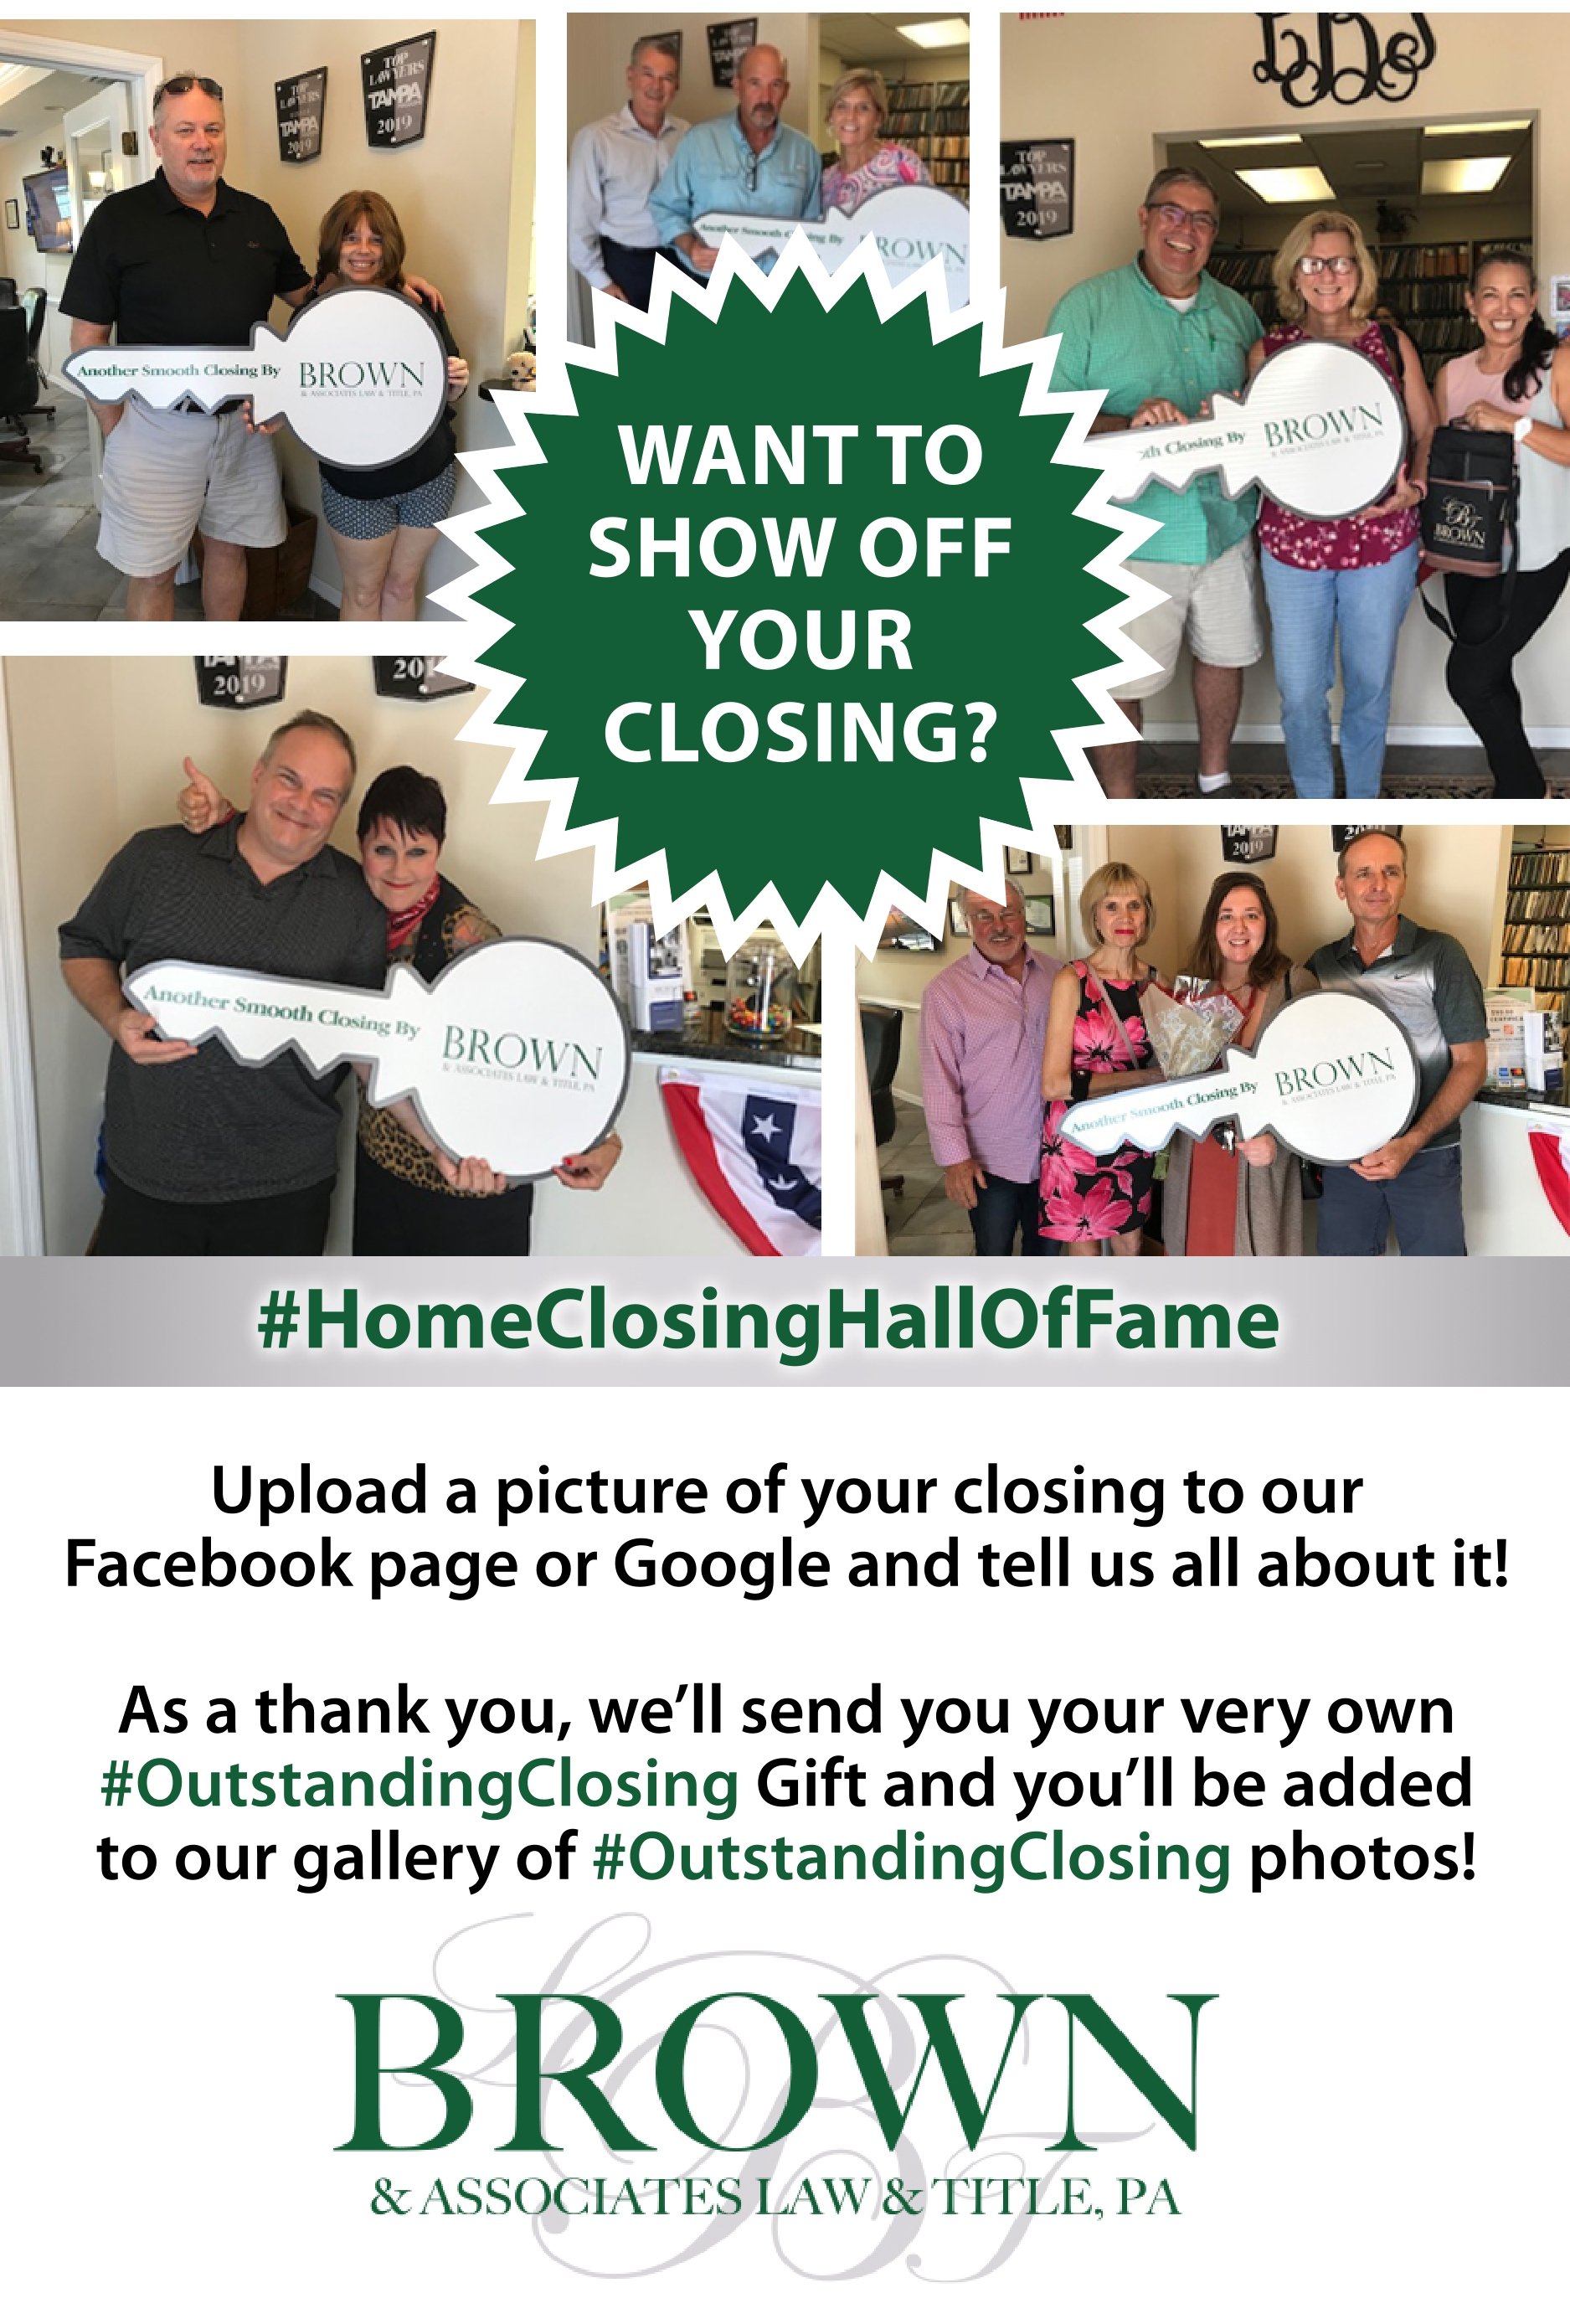 Home Closing Hall of Fame